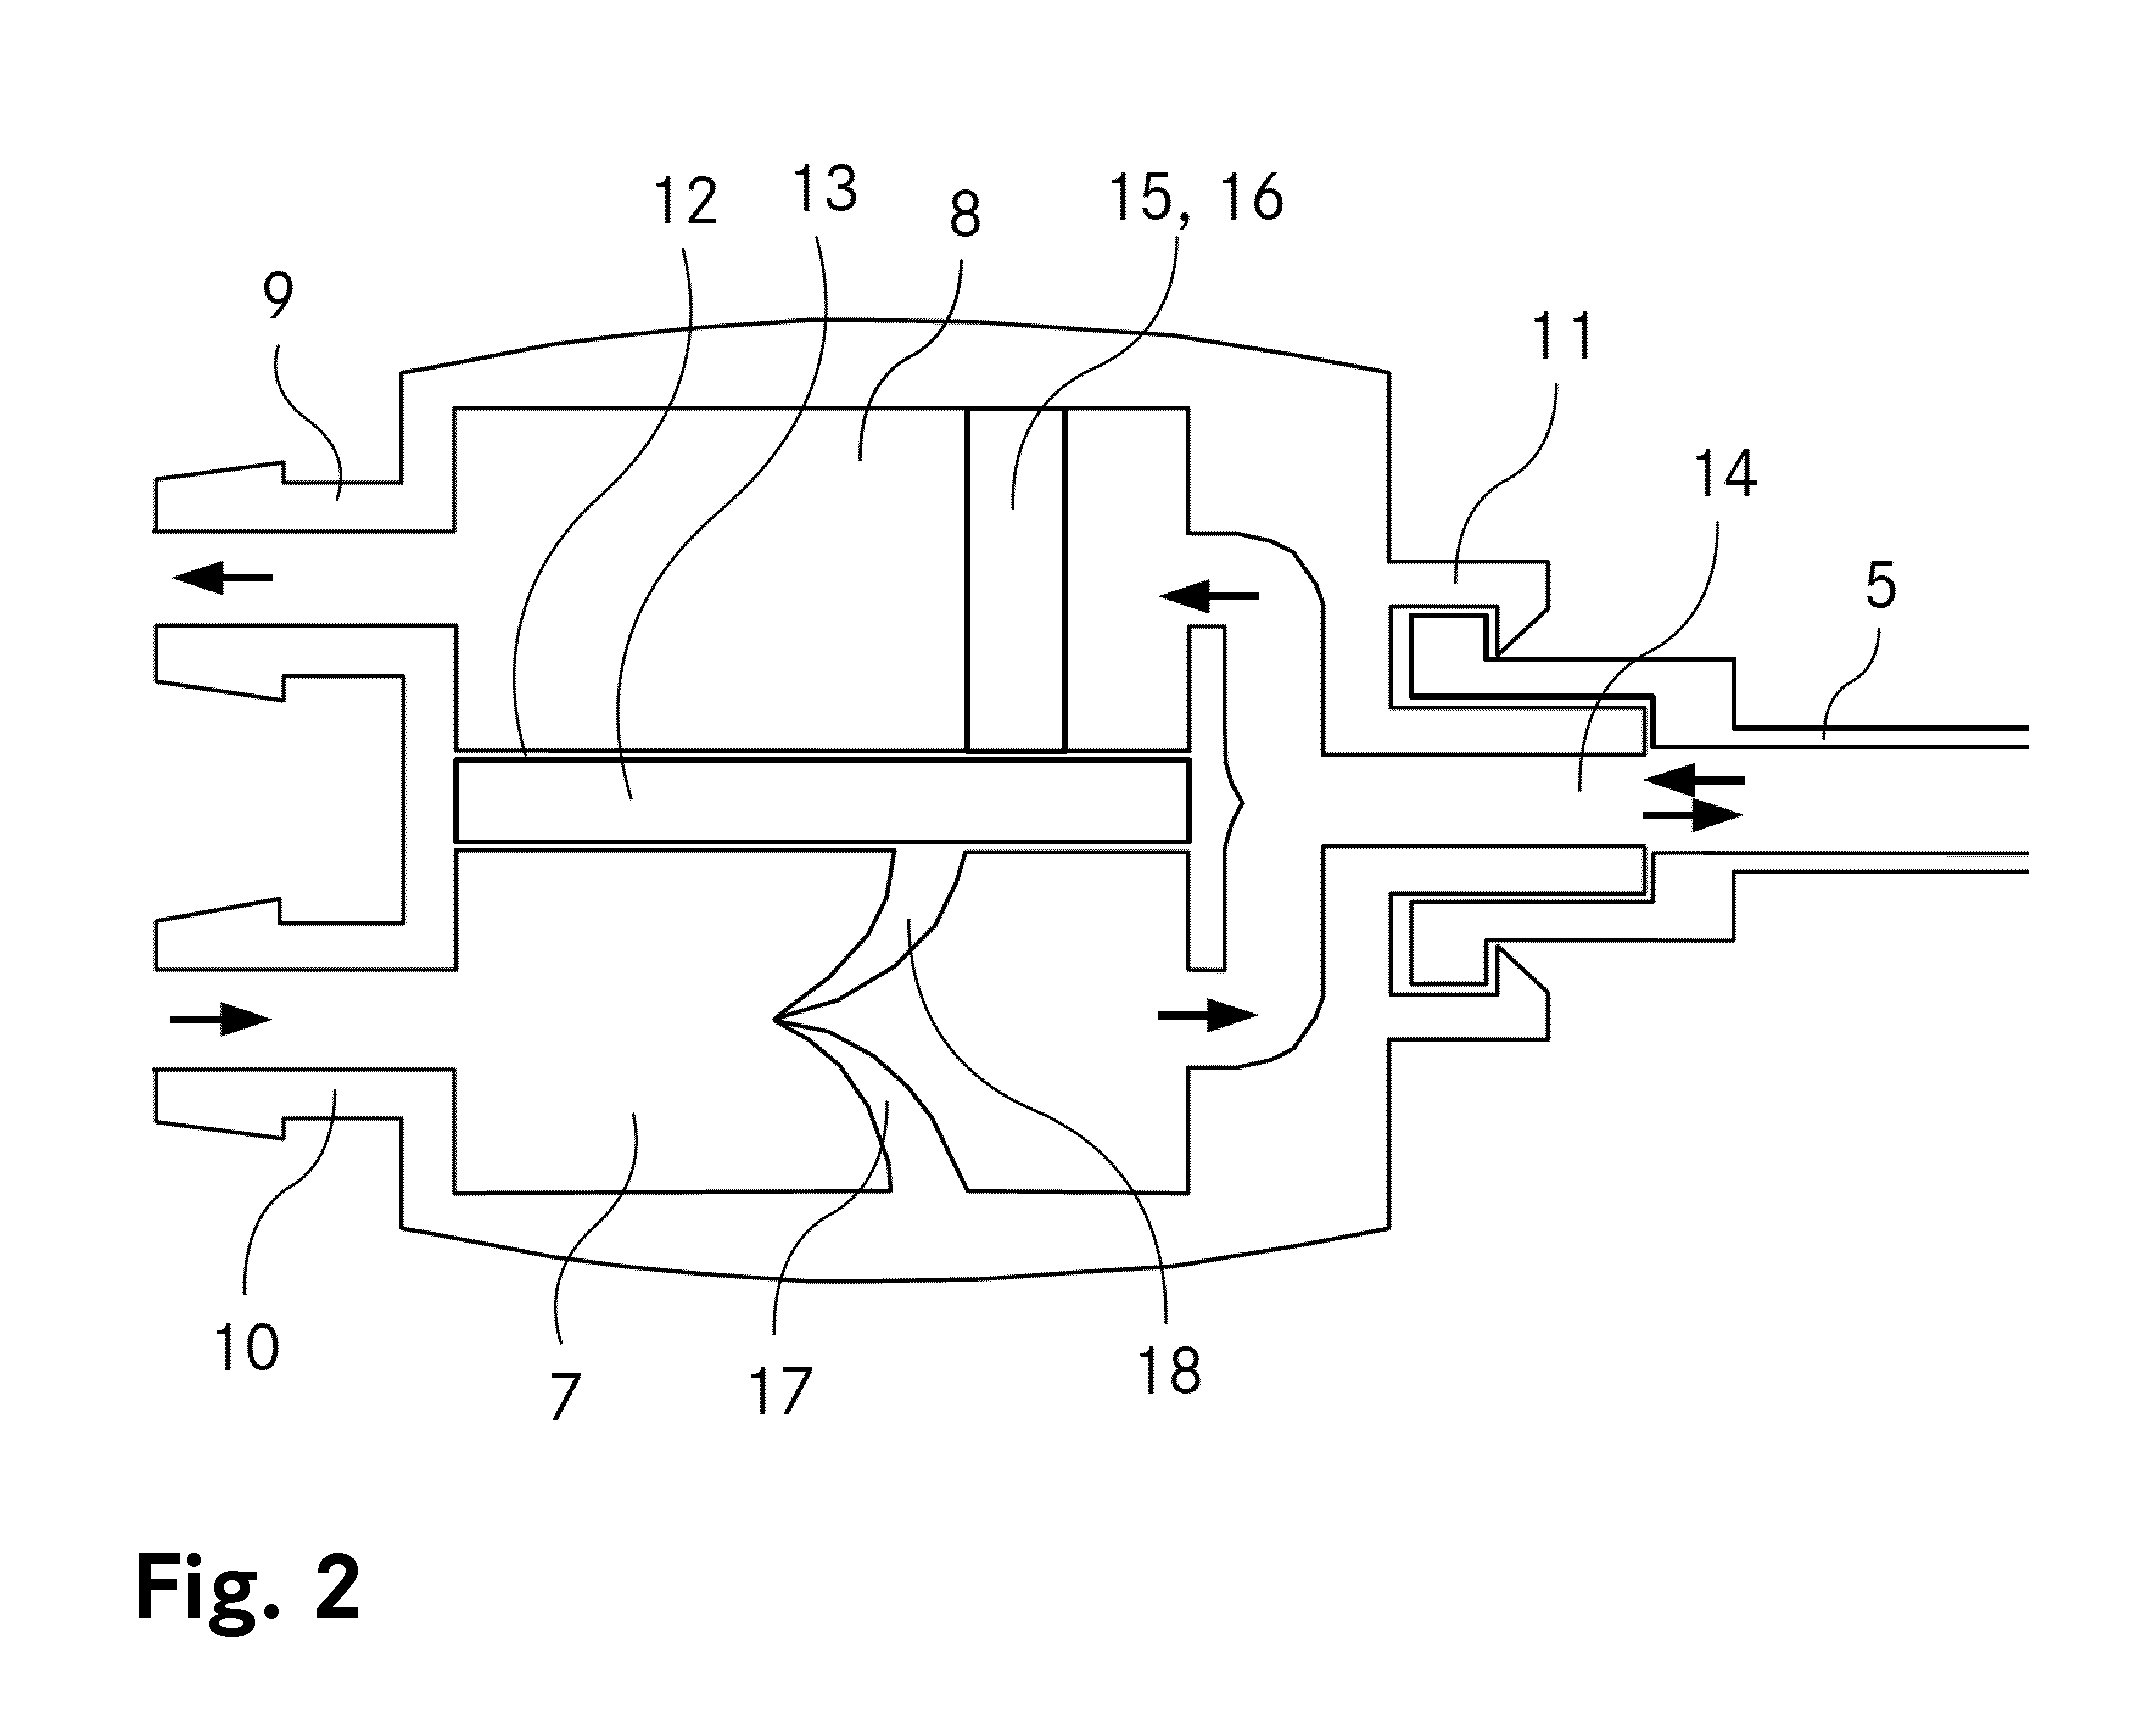 Suction and irrigation device